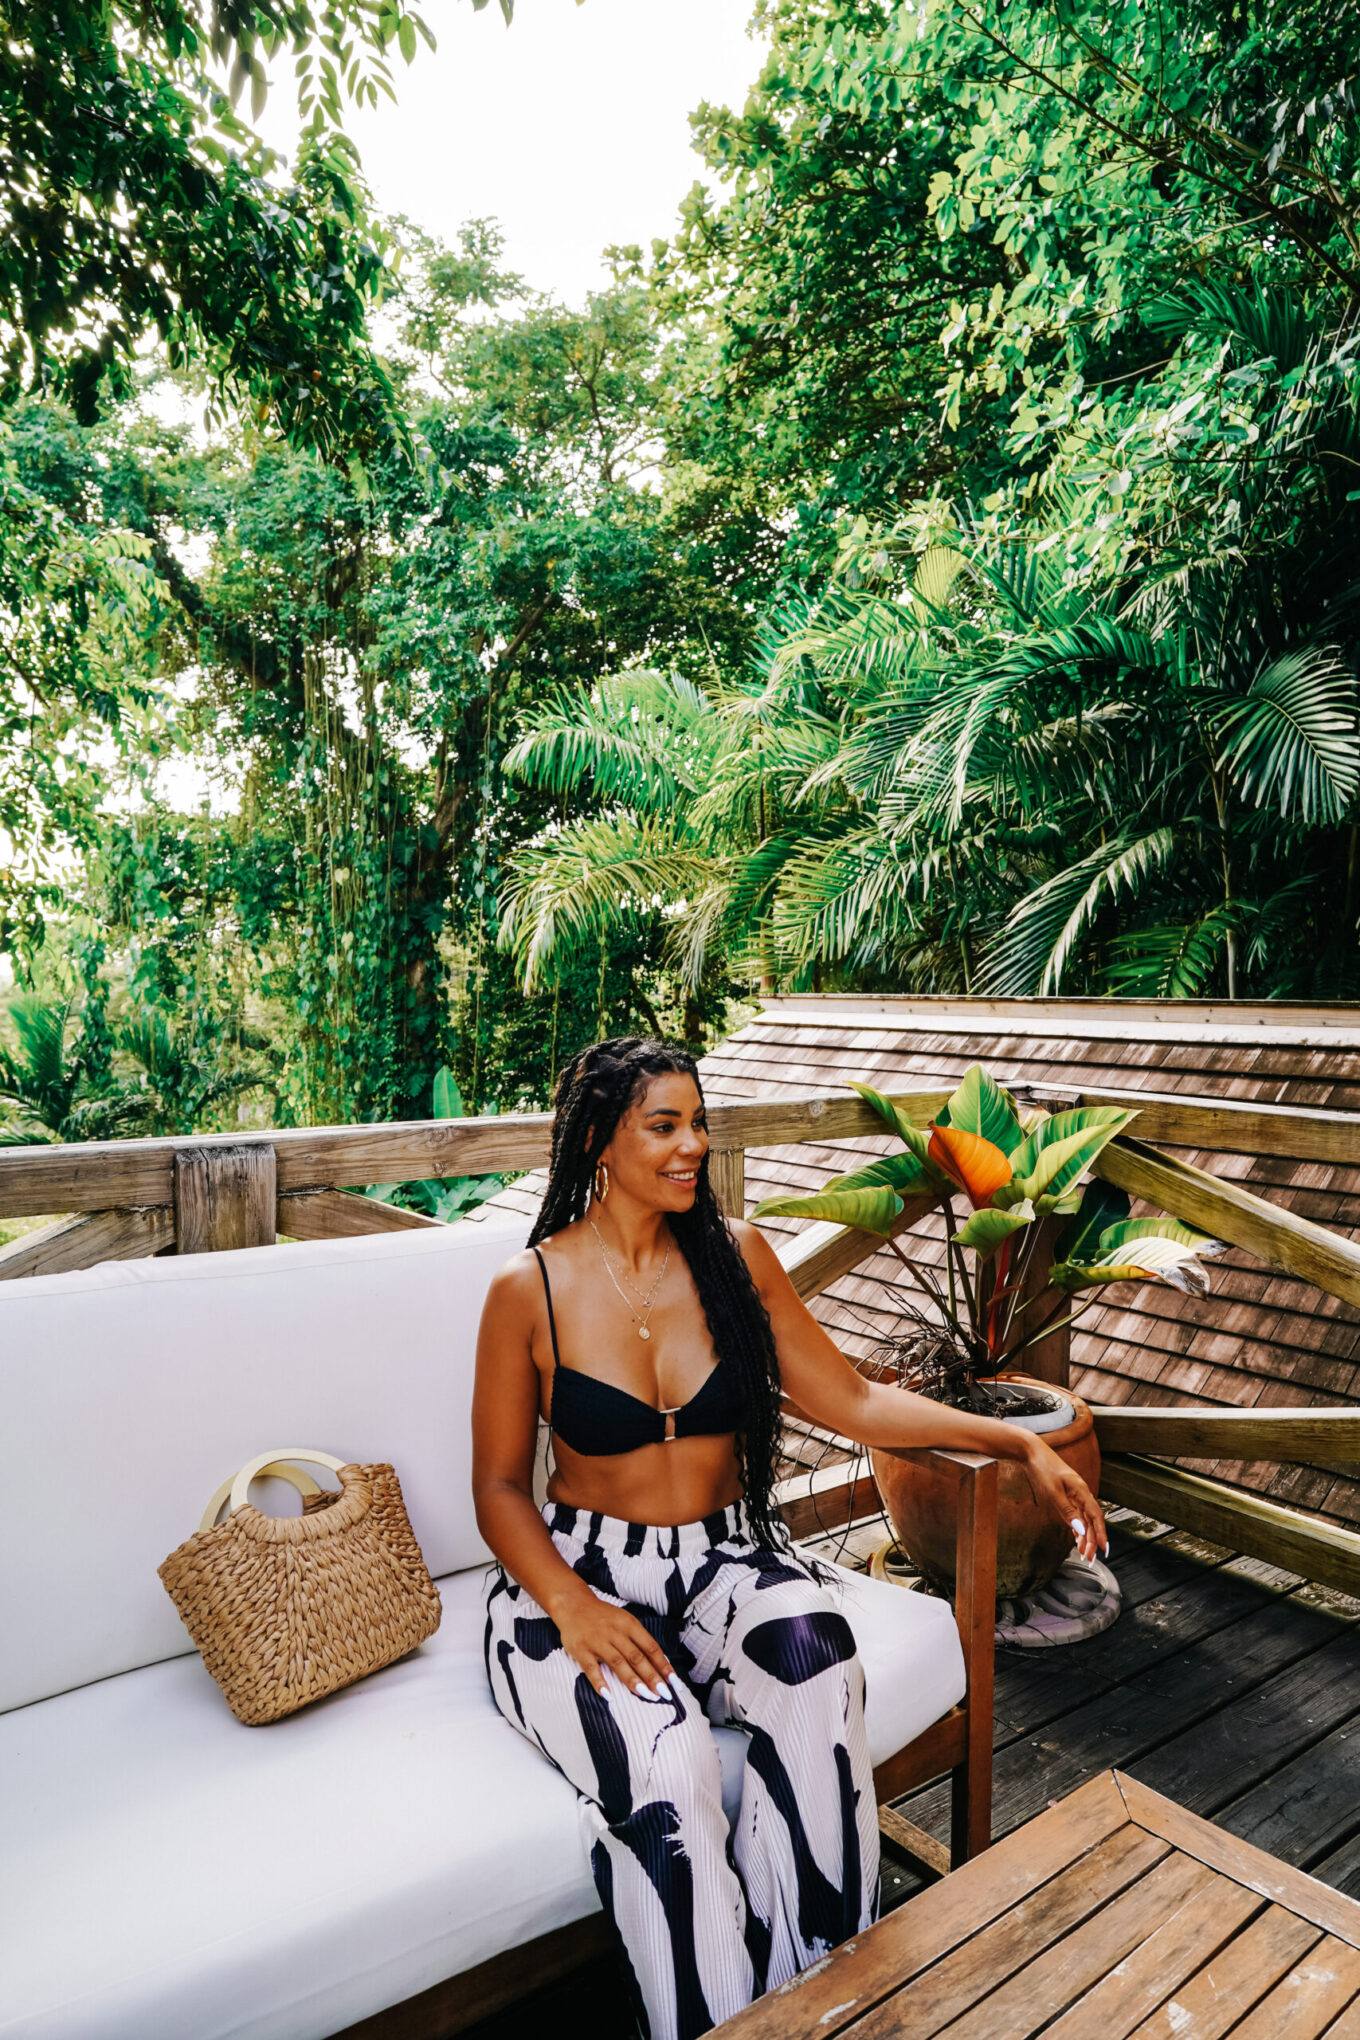 Kanopi House: A Eco-Chic Boutique Hotel offering an authentic island experience in Portland, Jamaica